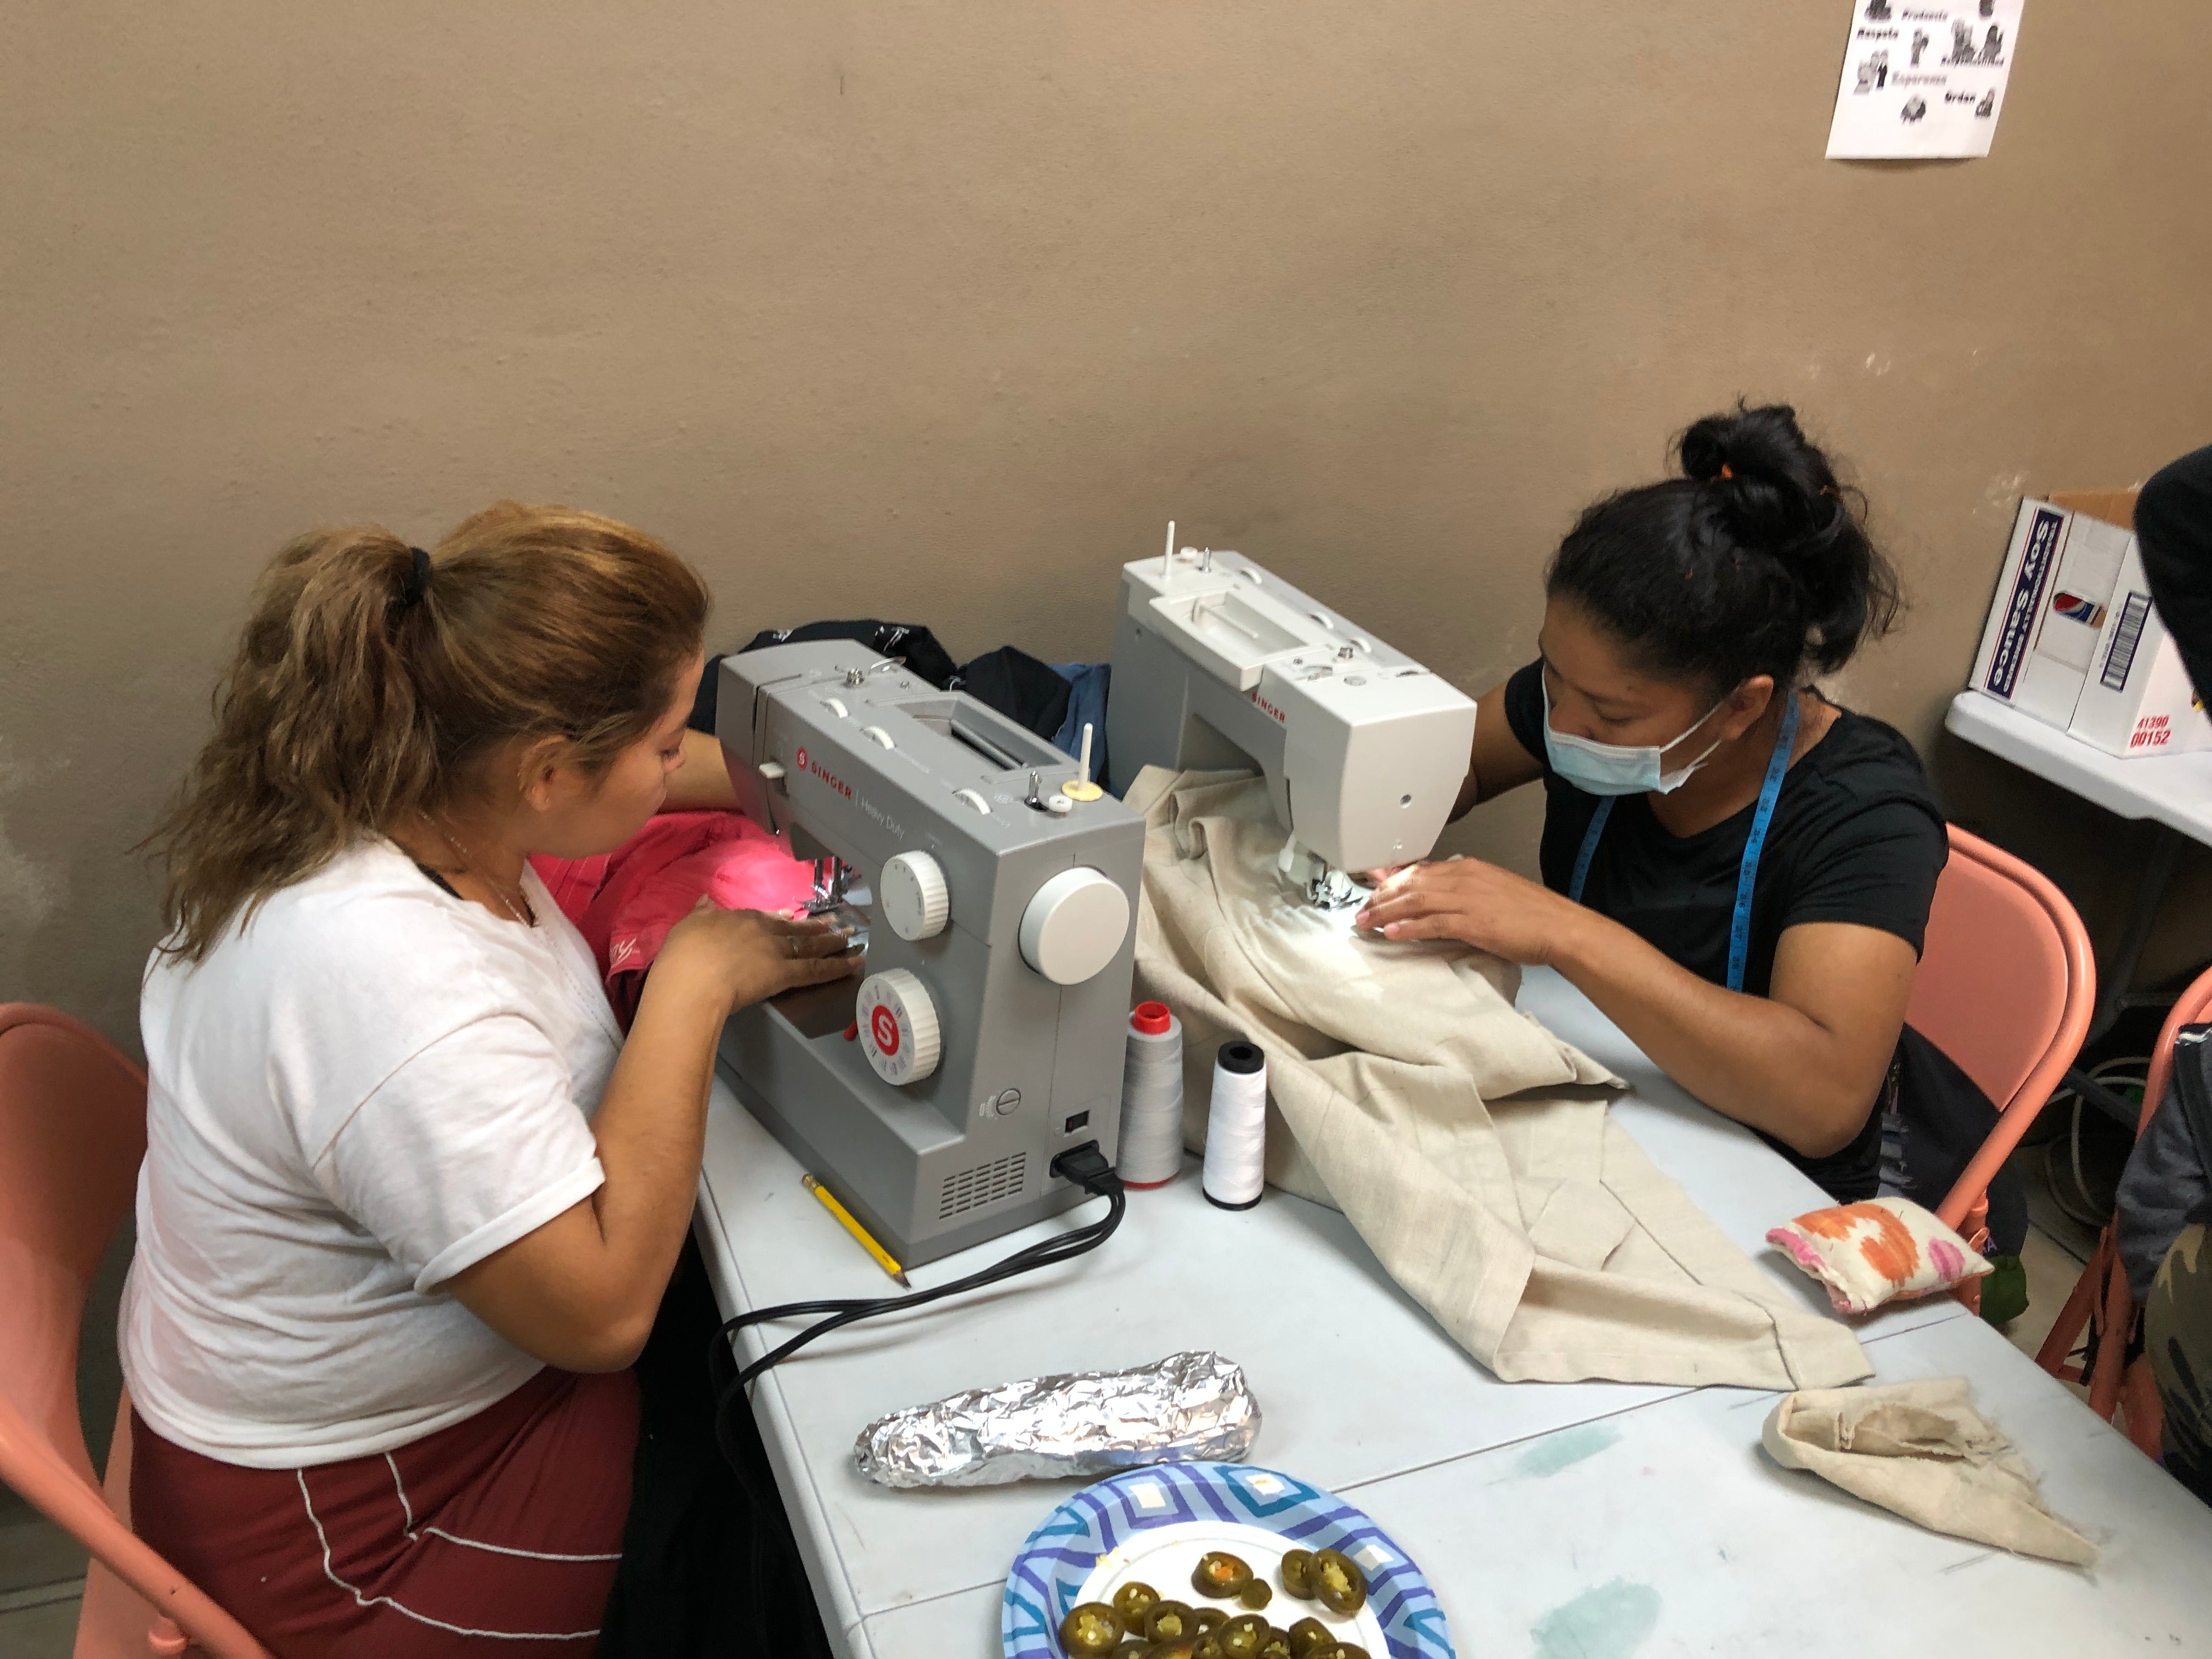 2 women working sewing collective refugee sanctuary partnership with do good shop ethical gifts nonprofit